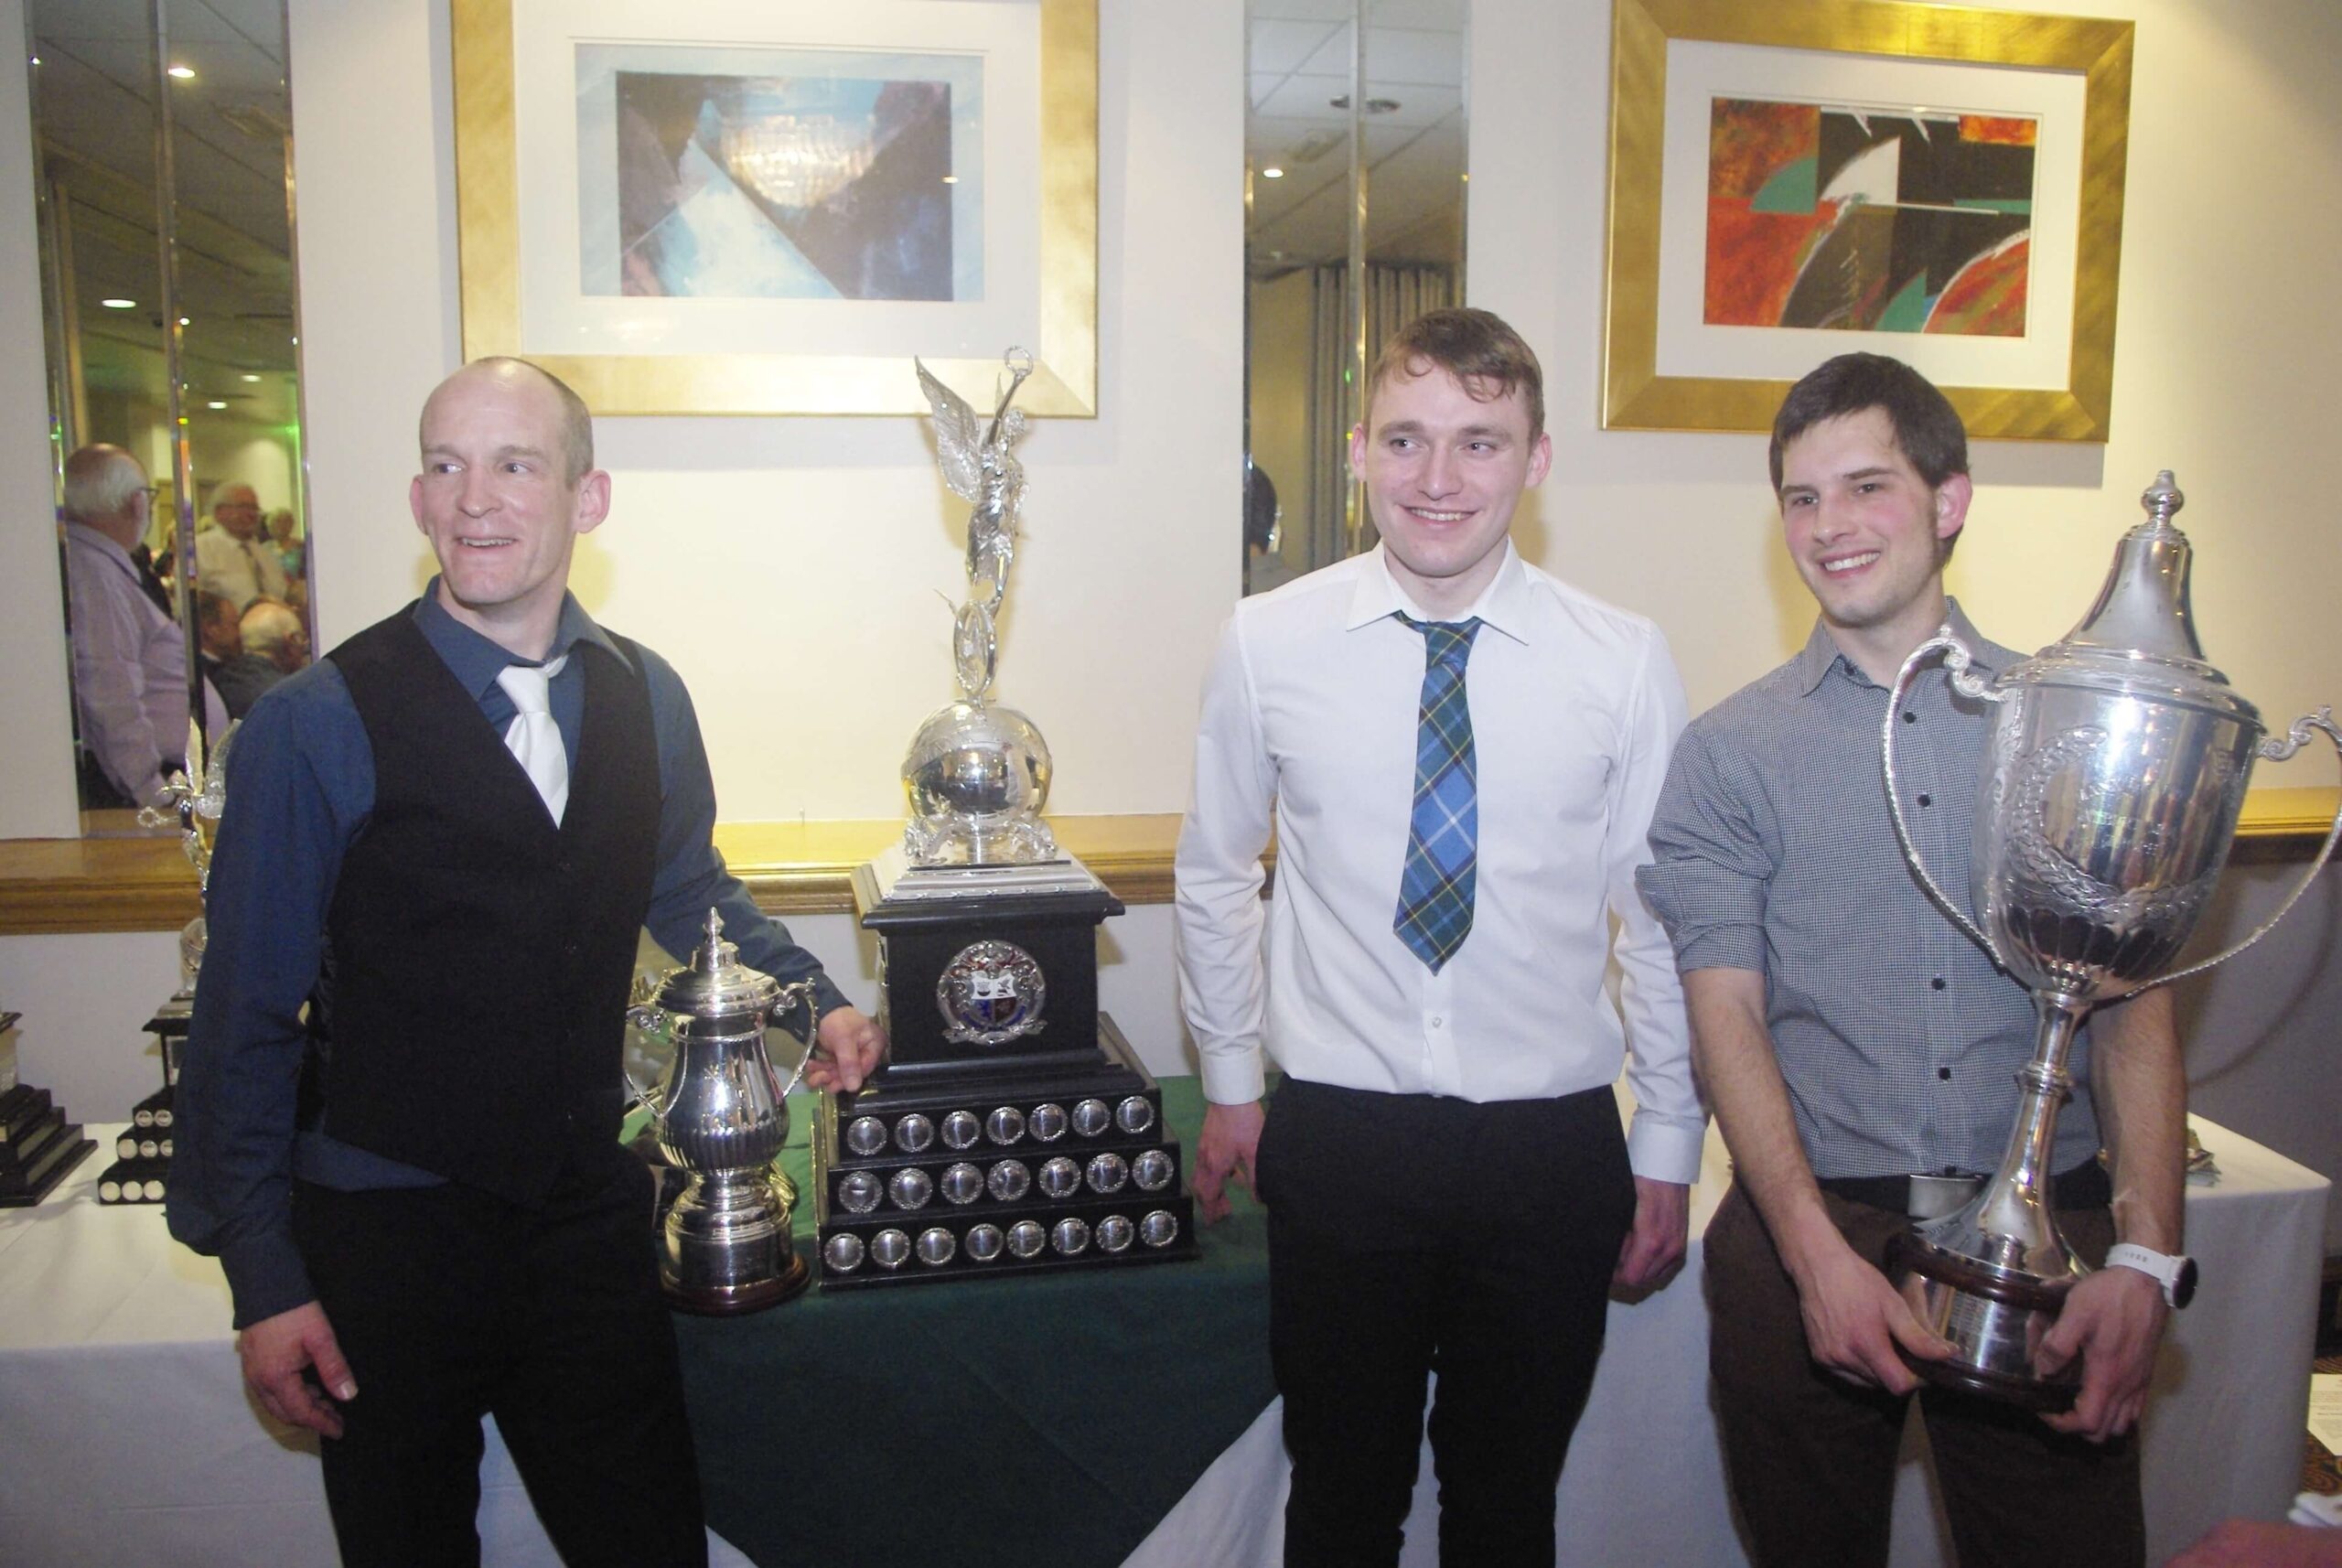 Last Year’s MGP Winners Celebrated At Annual Manx Motorcycle Club Dinner Evening